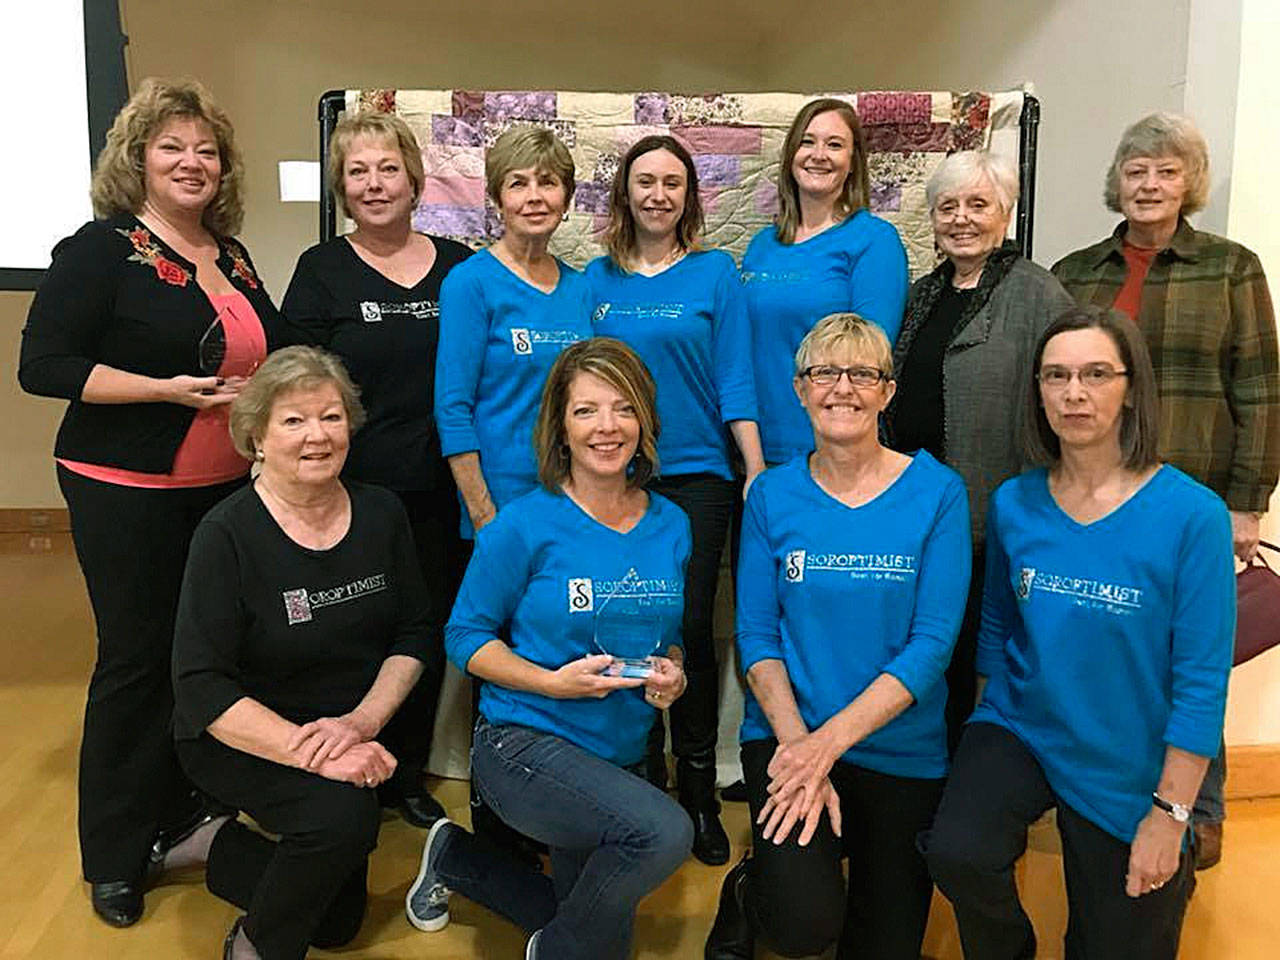 Attending the recent Toast for Recovery Breakfast are, front row, from left: Nancy Colson, Louanne Decker, Cheryl Sallee, Beth Gatzke; back row, from left, Mayor Nancy Backus, Sheryl Workman, Judi Roland, Ashley Fogelquist, Shanna Crane, Joan Mason and Sandra Burroughs. COURTESY PHOTO